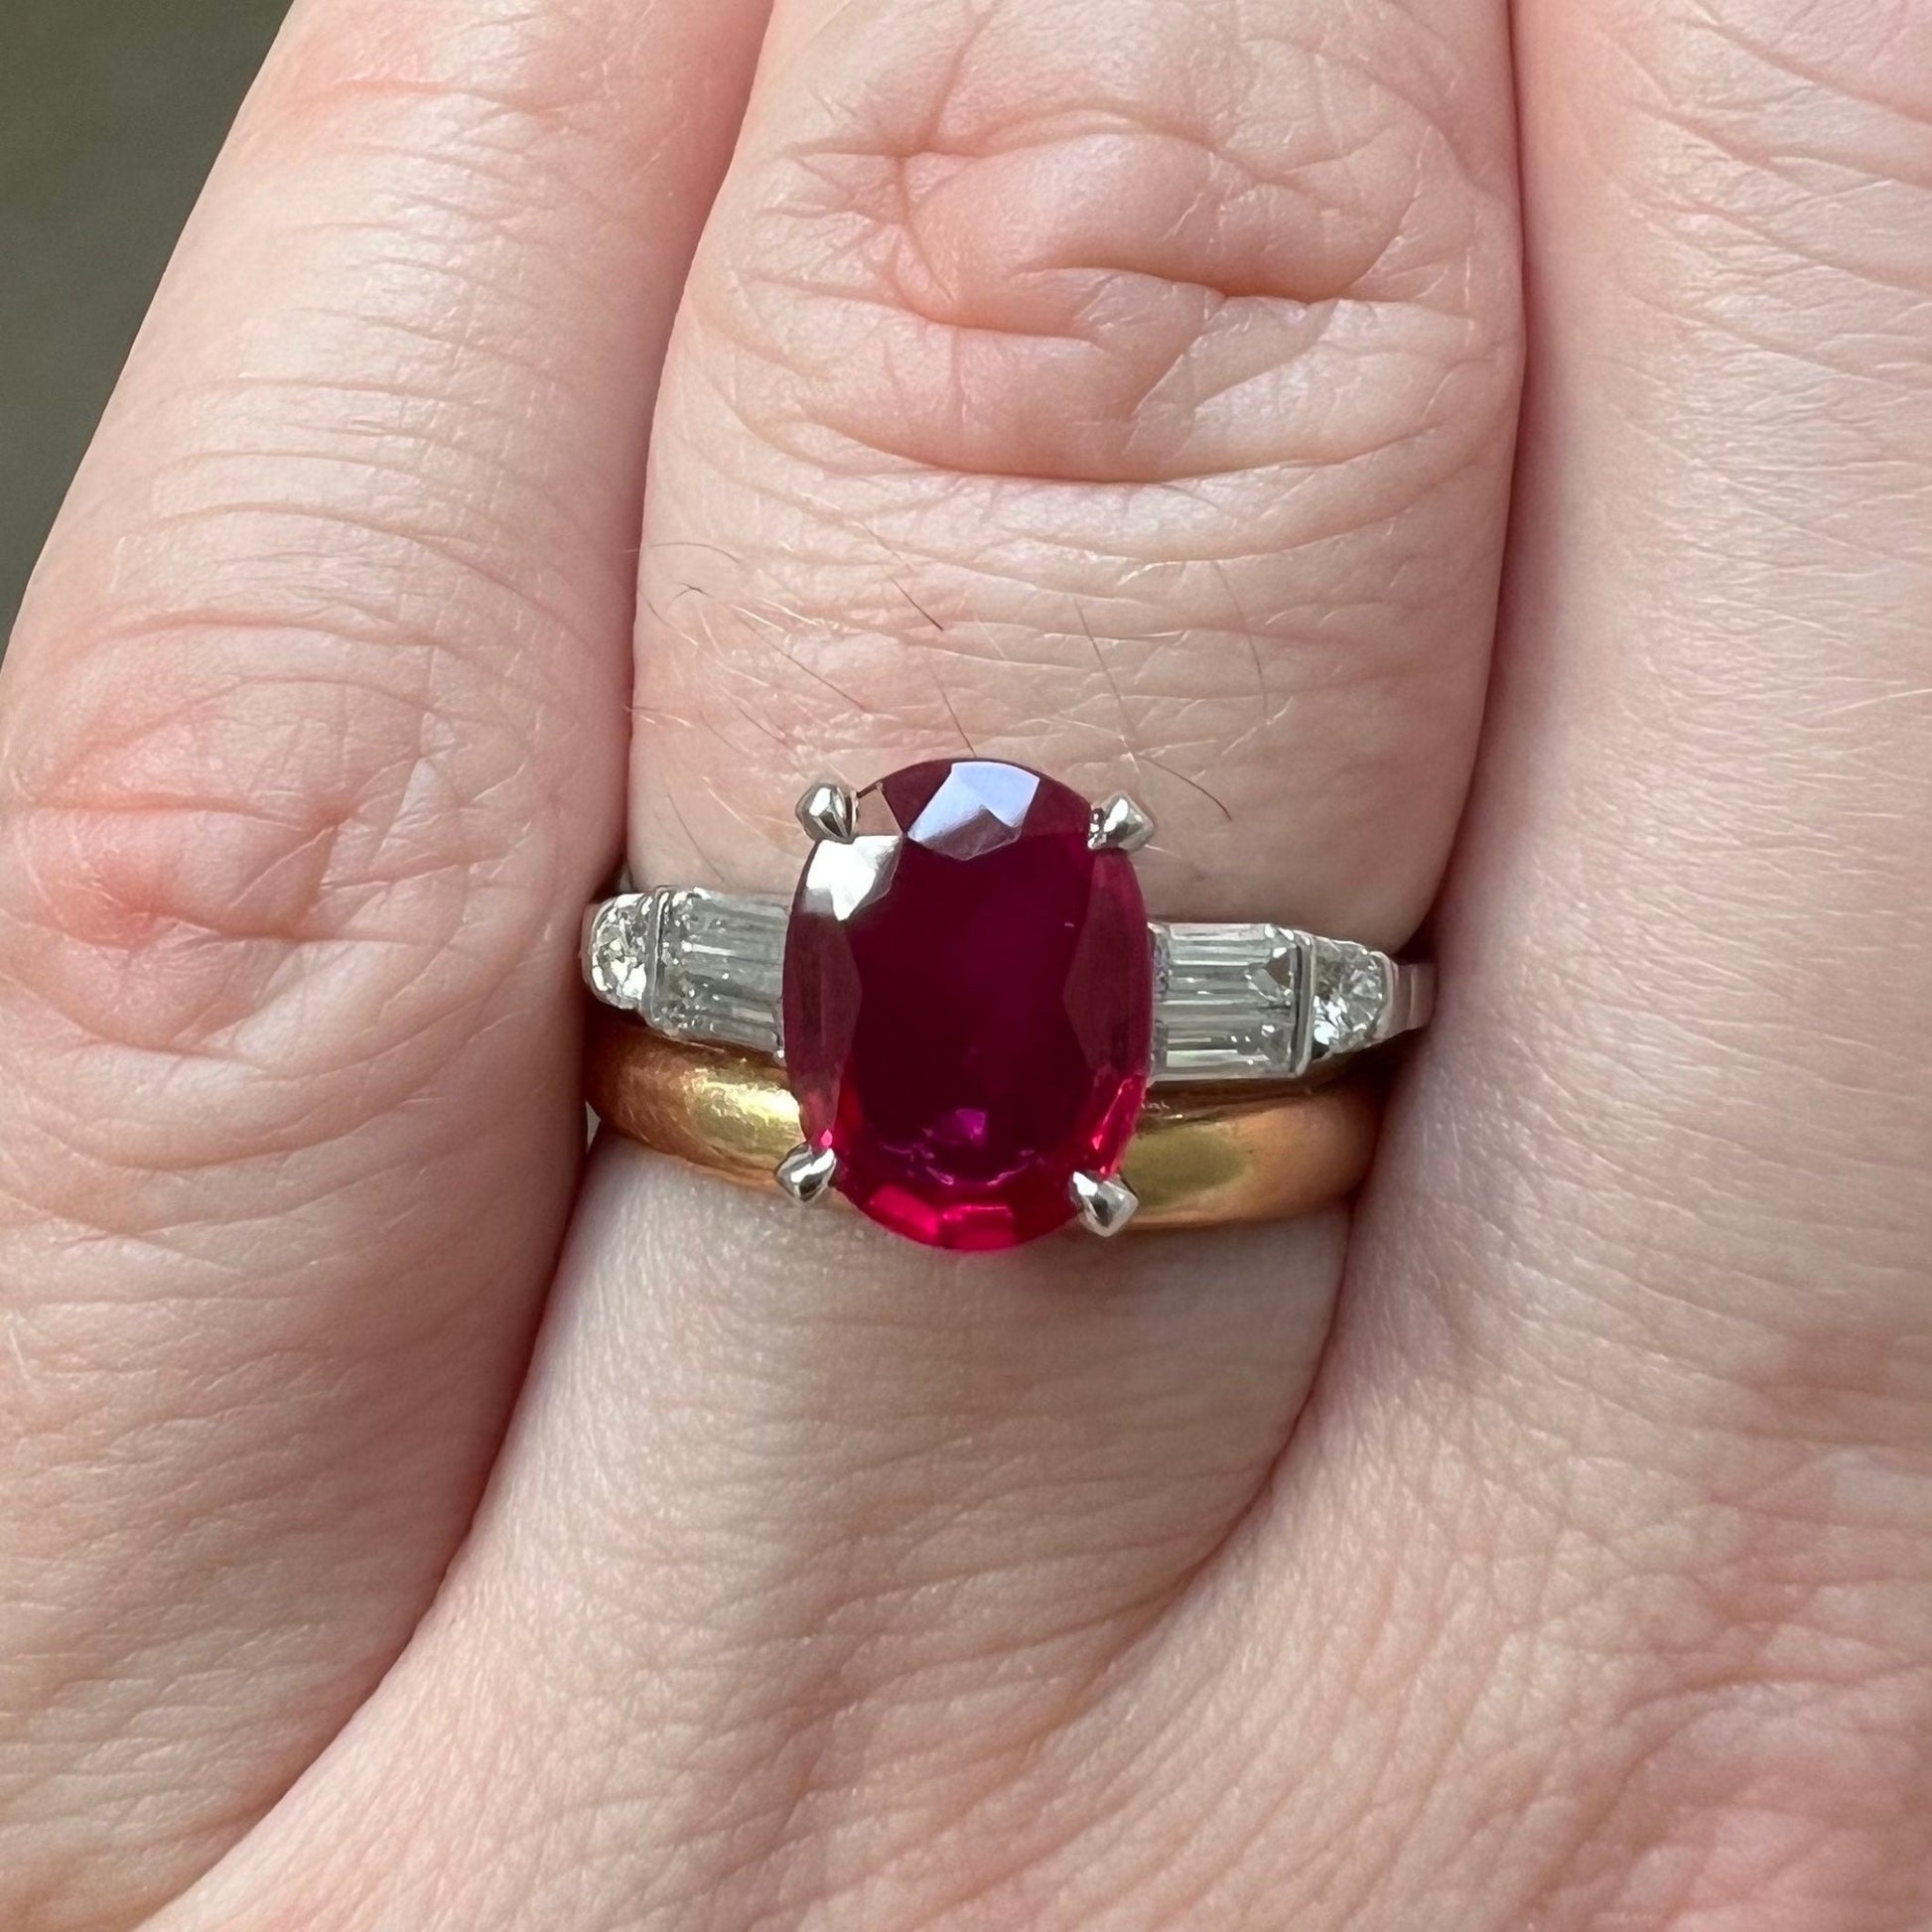 Vintage Handcrafted Platinum 2.05 Carat Oval Ruby & Diamond Engagement Ring By Carvin French - WeilJewelry